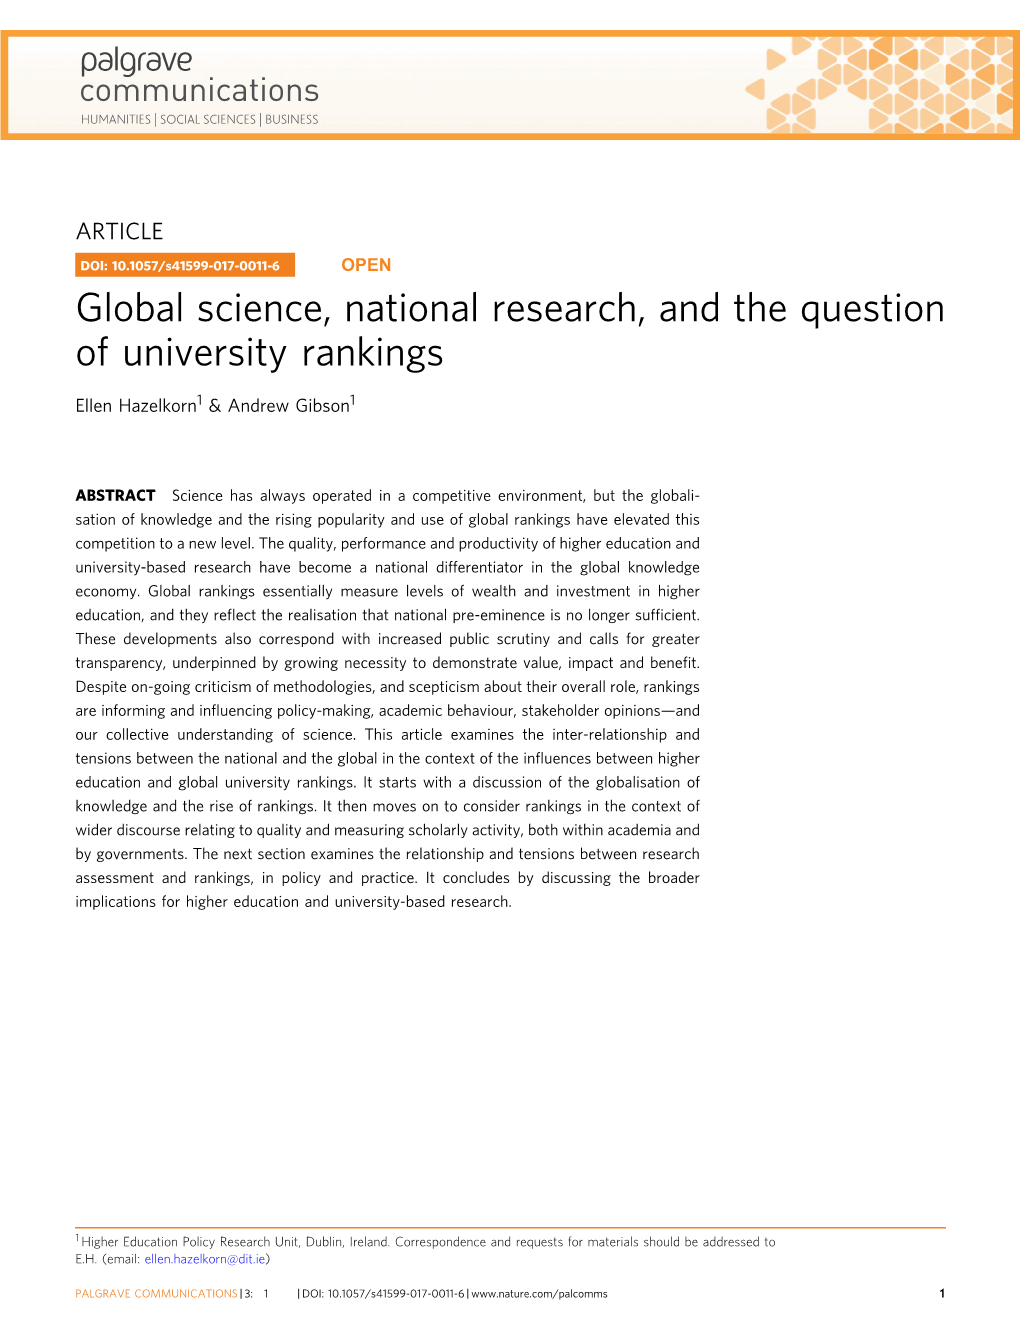 Global Science, National Research, and the Question of University Rankings